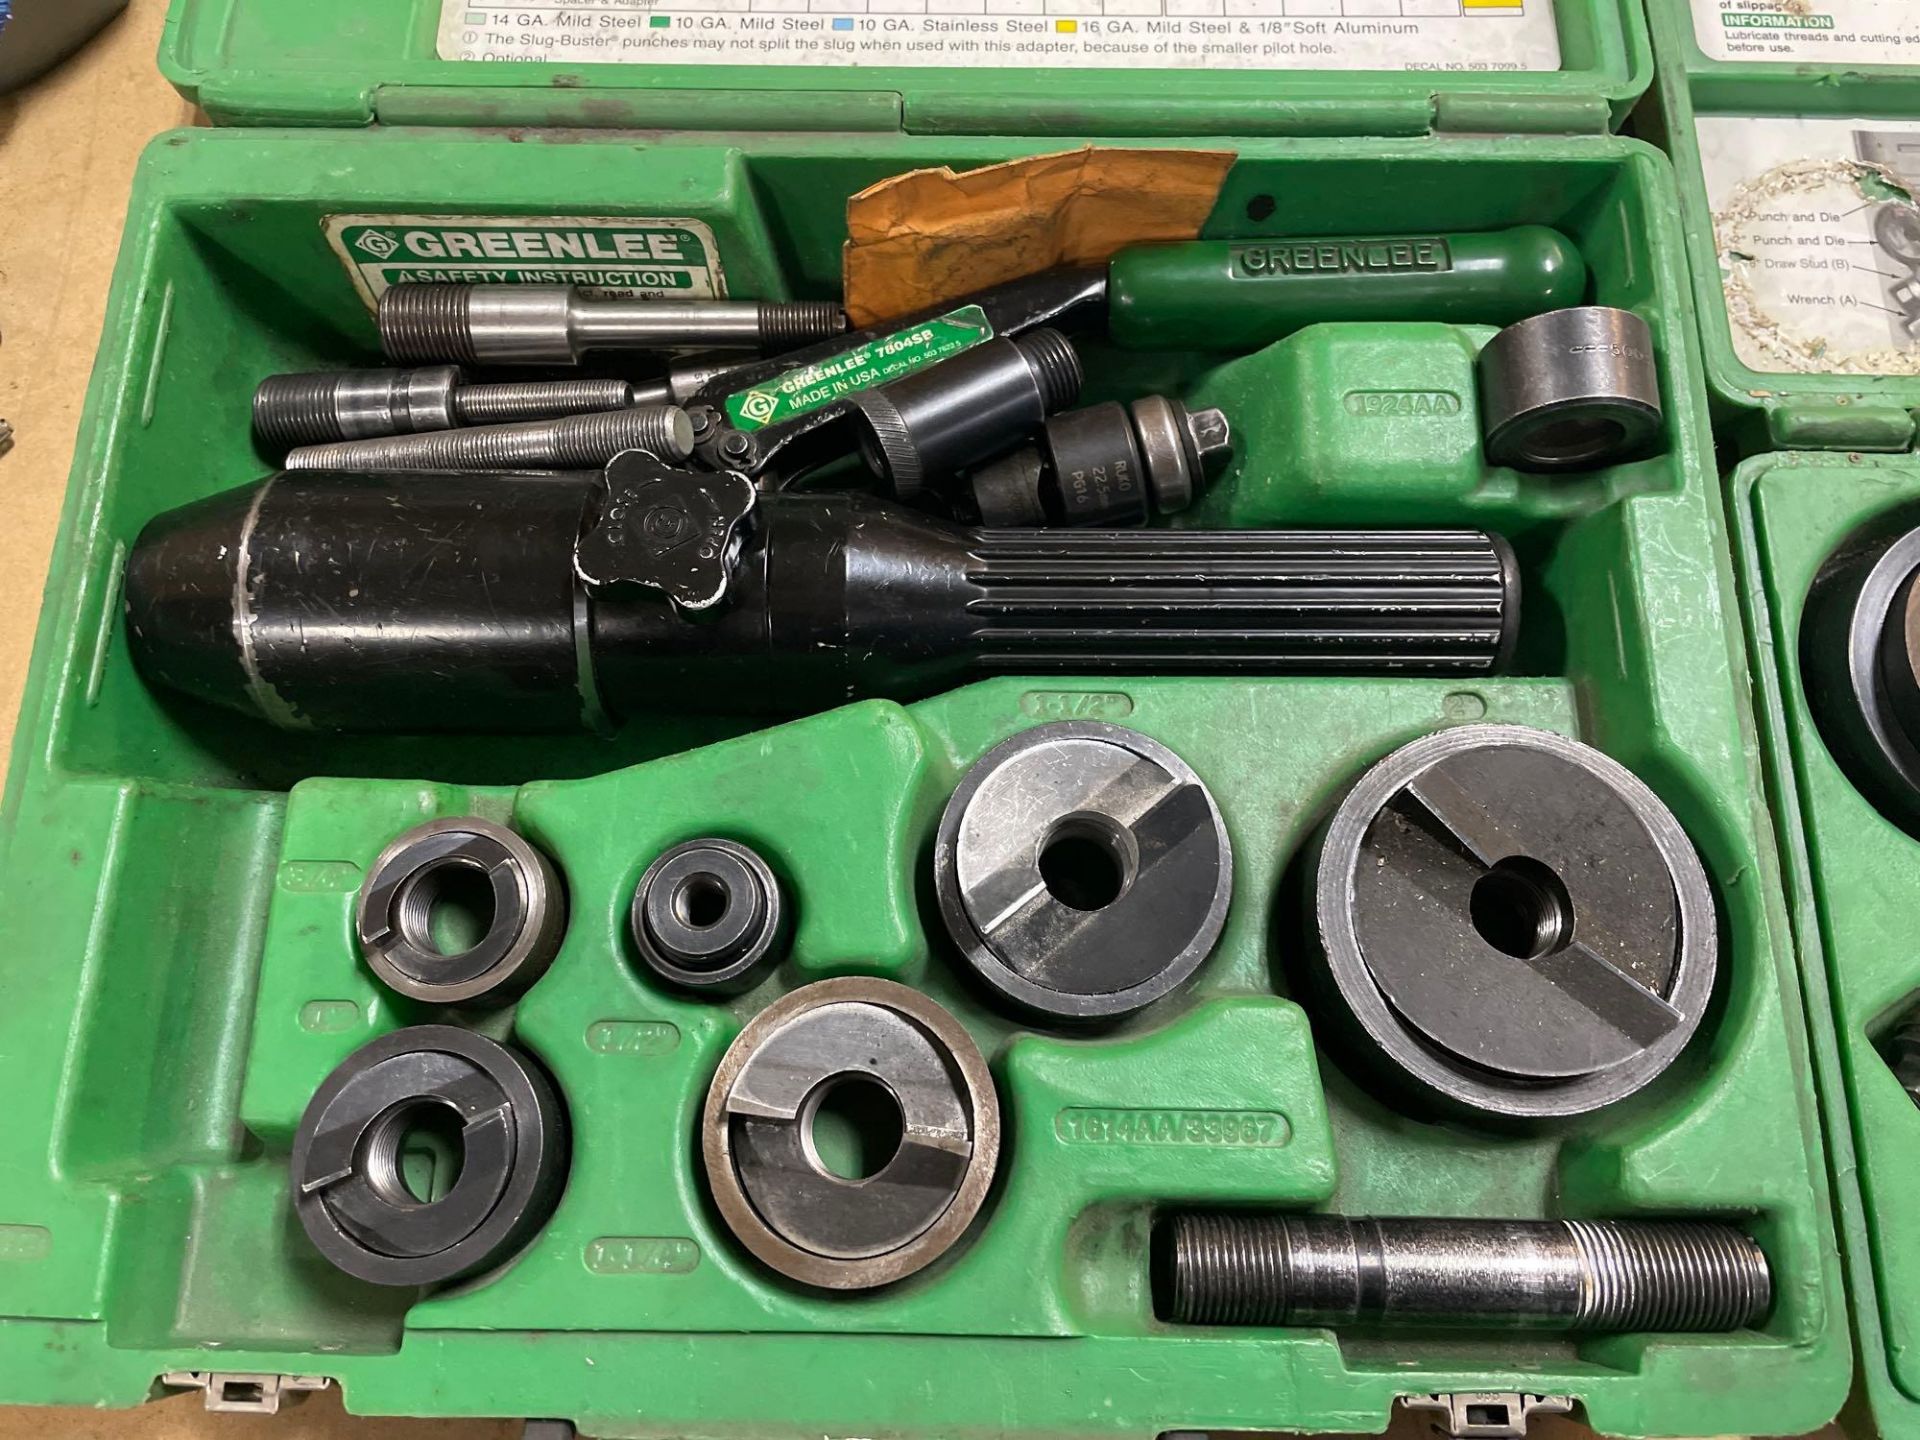 Greenlee Hydraulic Punch Driver/Knockout Punch Kits - Image 2 of 5